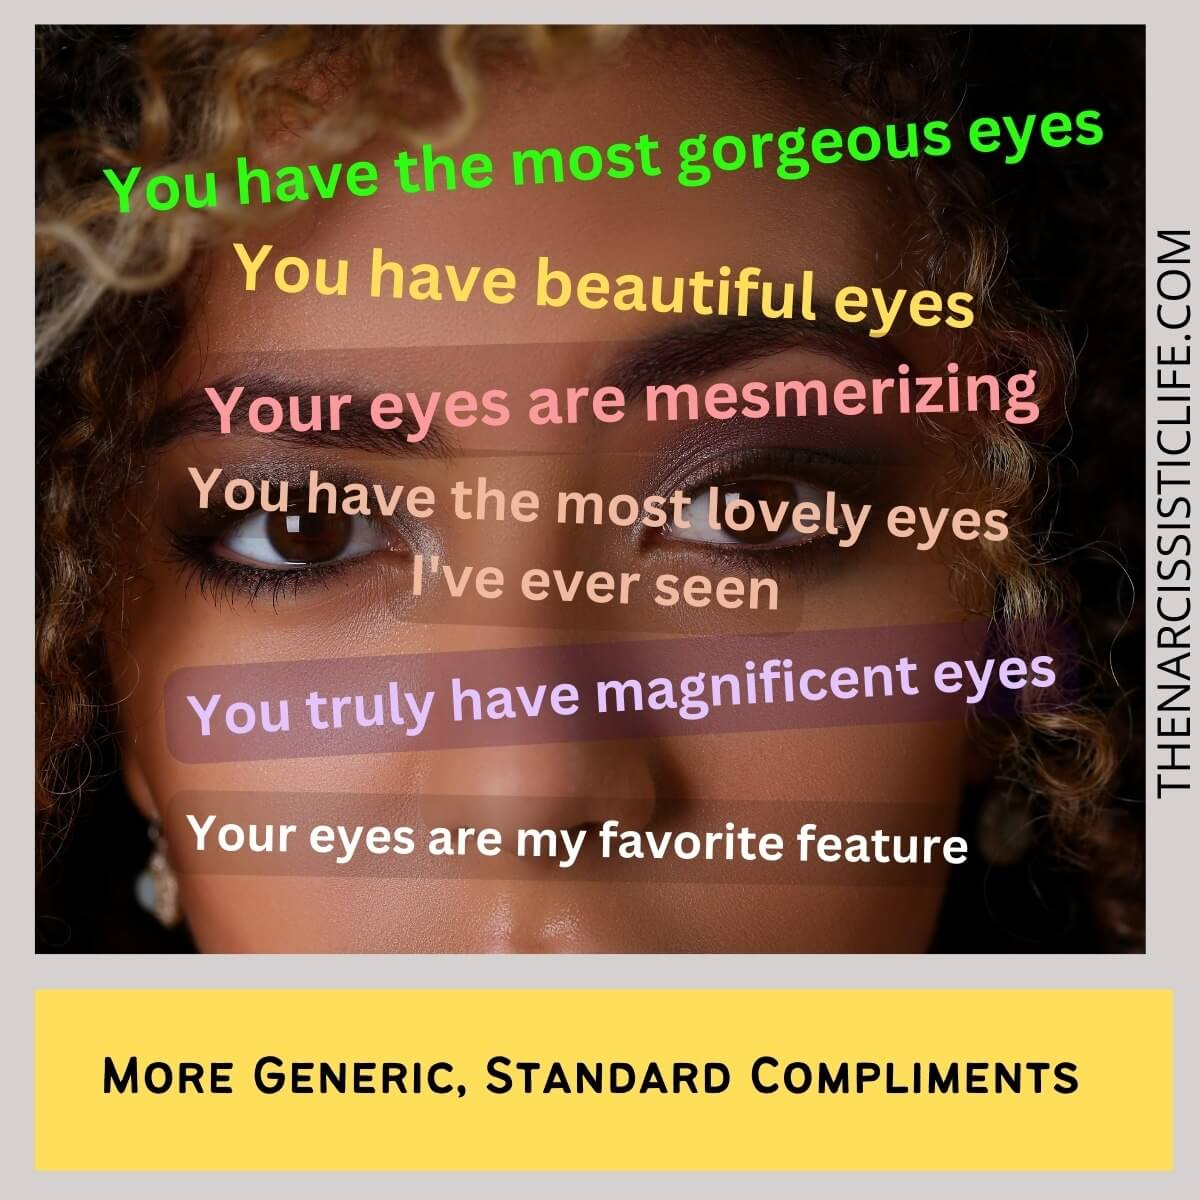 The Right Way to Compliment a Girl's Eyes - The Narcissistic Life